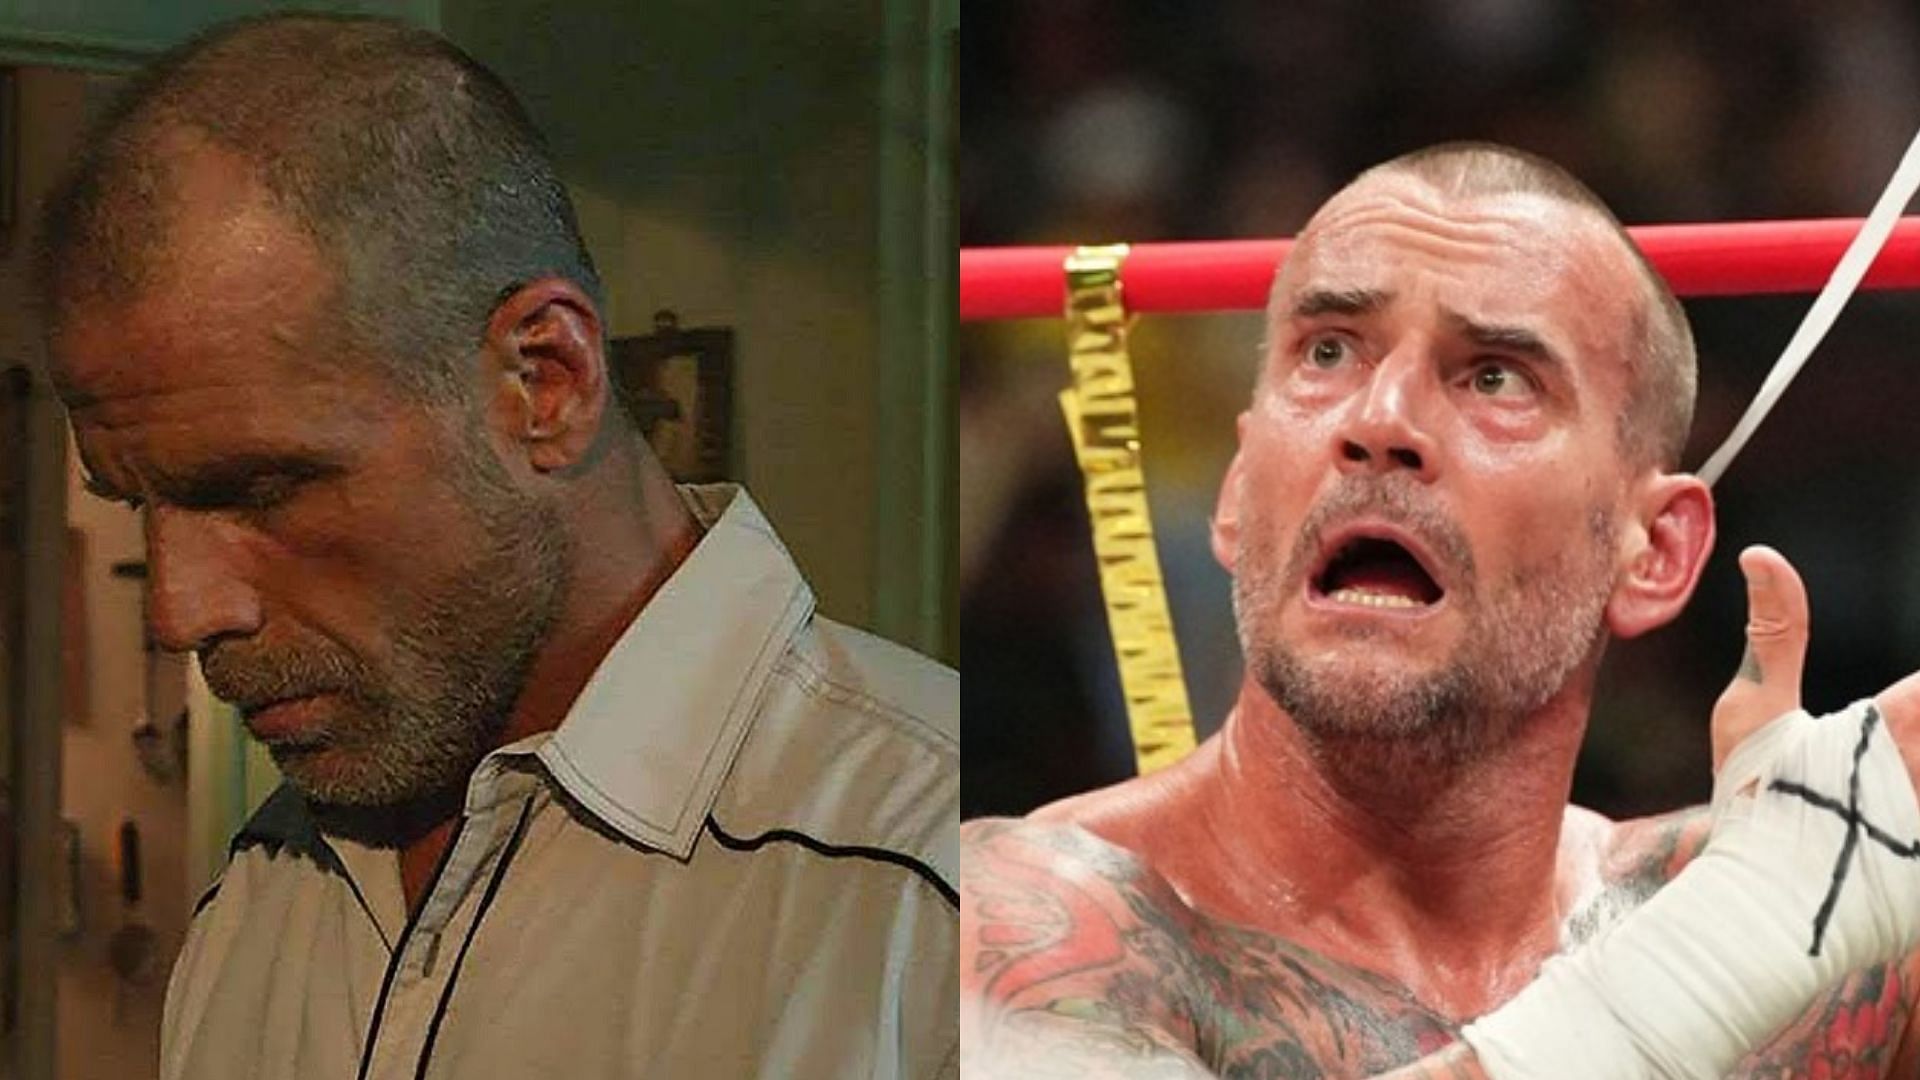 Shawn Michaels and CM Punk might have some words soon